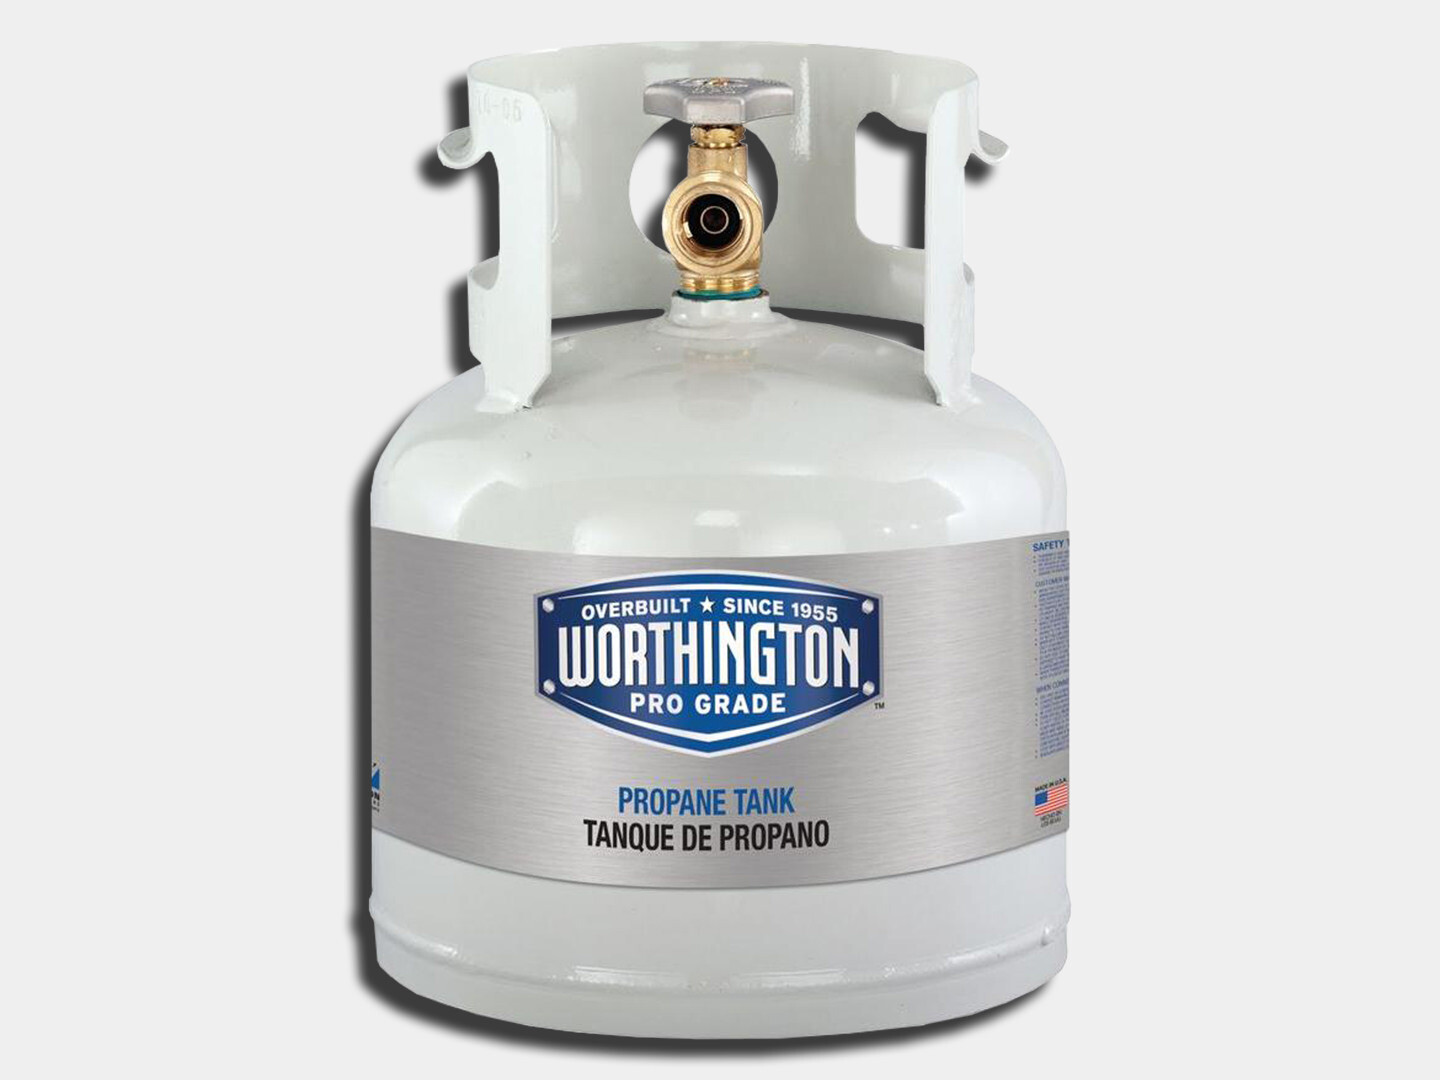 Most consider a "full" 20 lb propane tank to hold 4 gallons of pr...